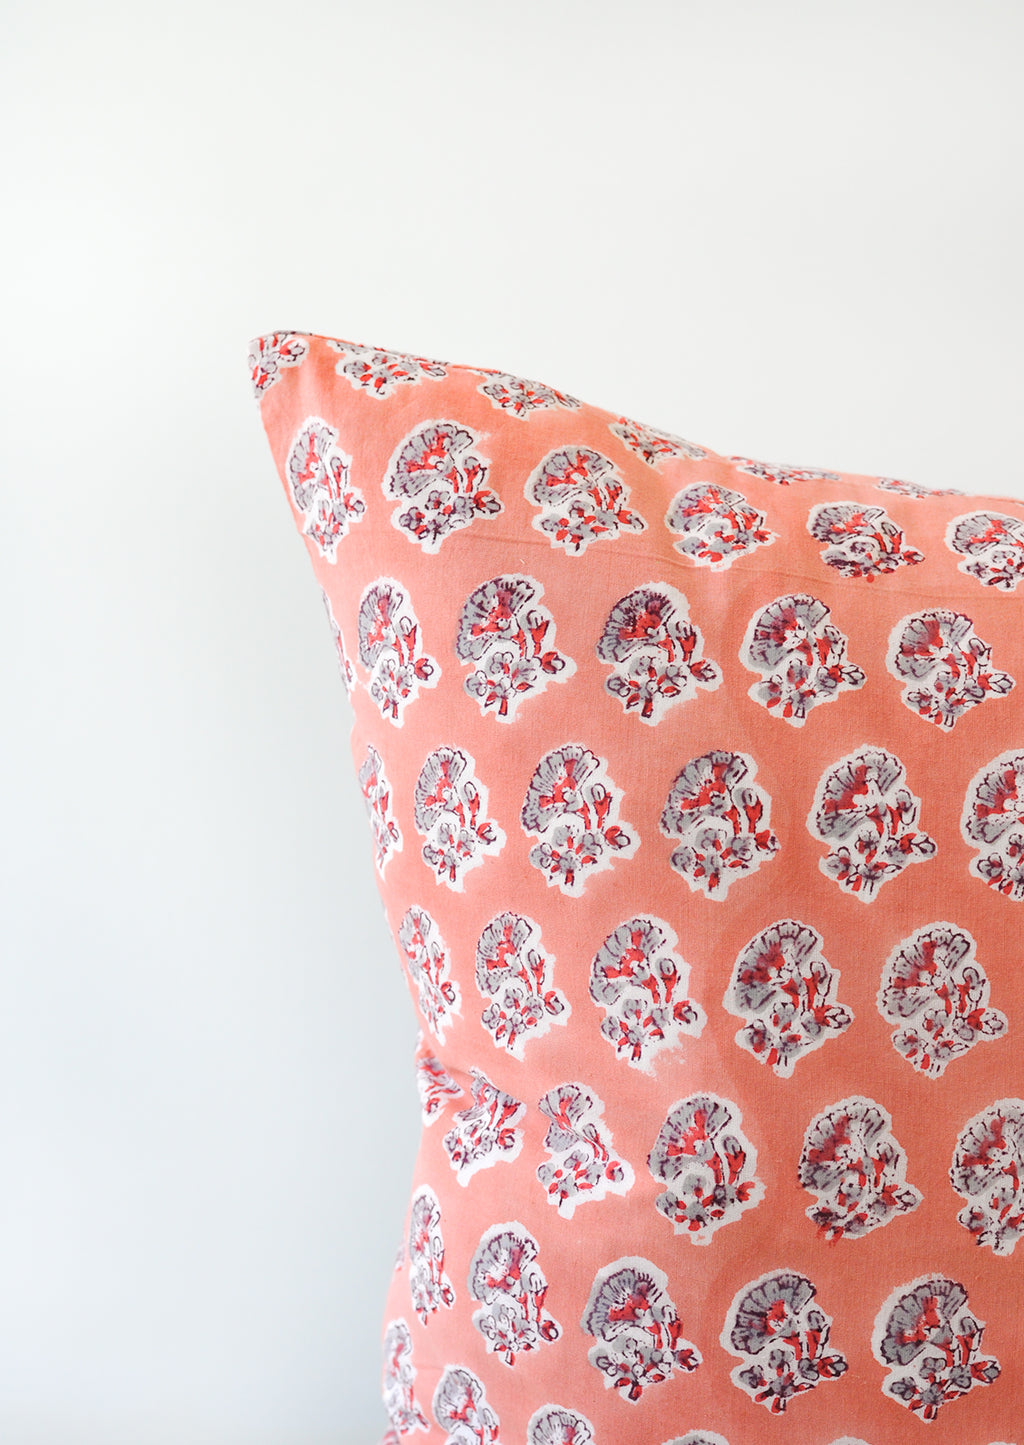 2: A detail shot of a block printed pillow with a pink, grey, and red floral design.